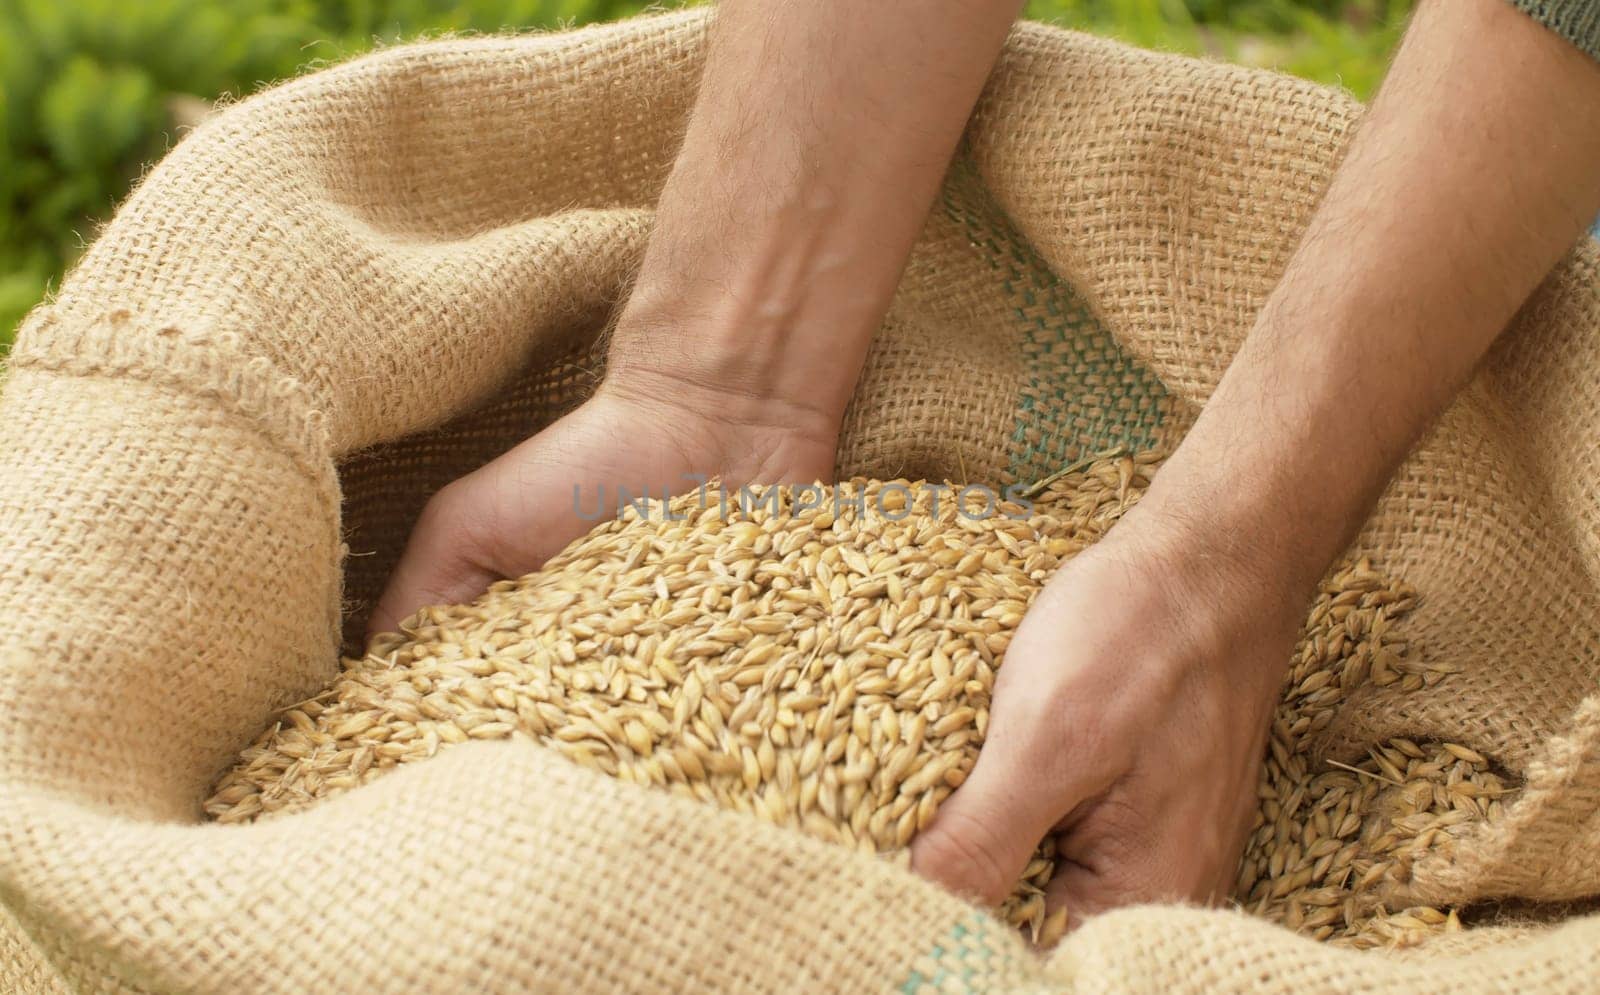 Male hands pouring rye grains. Burlap sack of grain outdoors on a farm. Harvesting, farming.